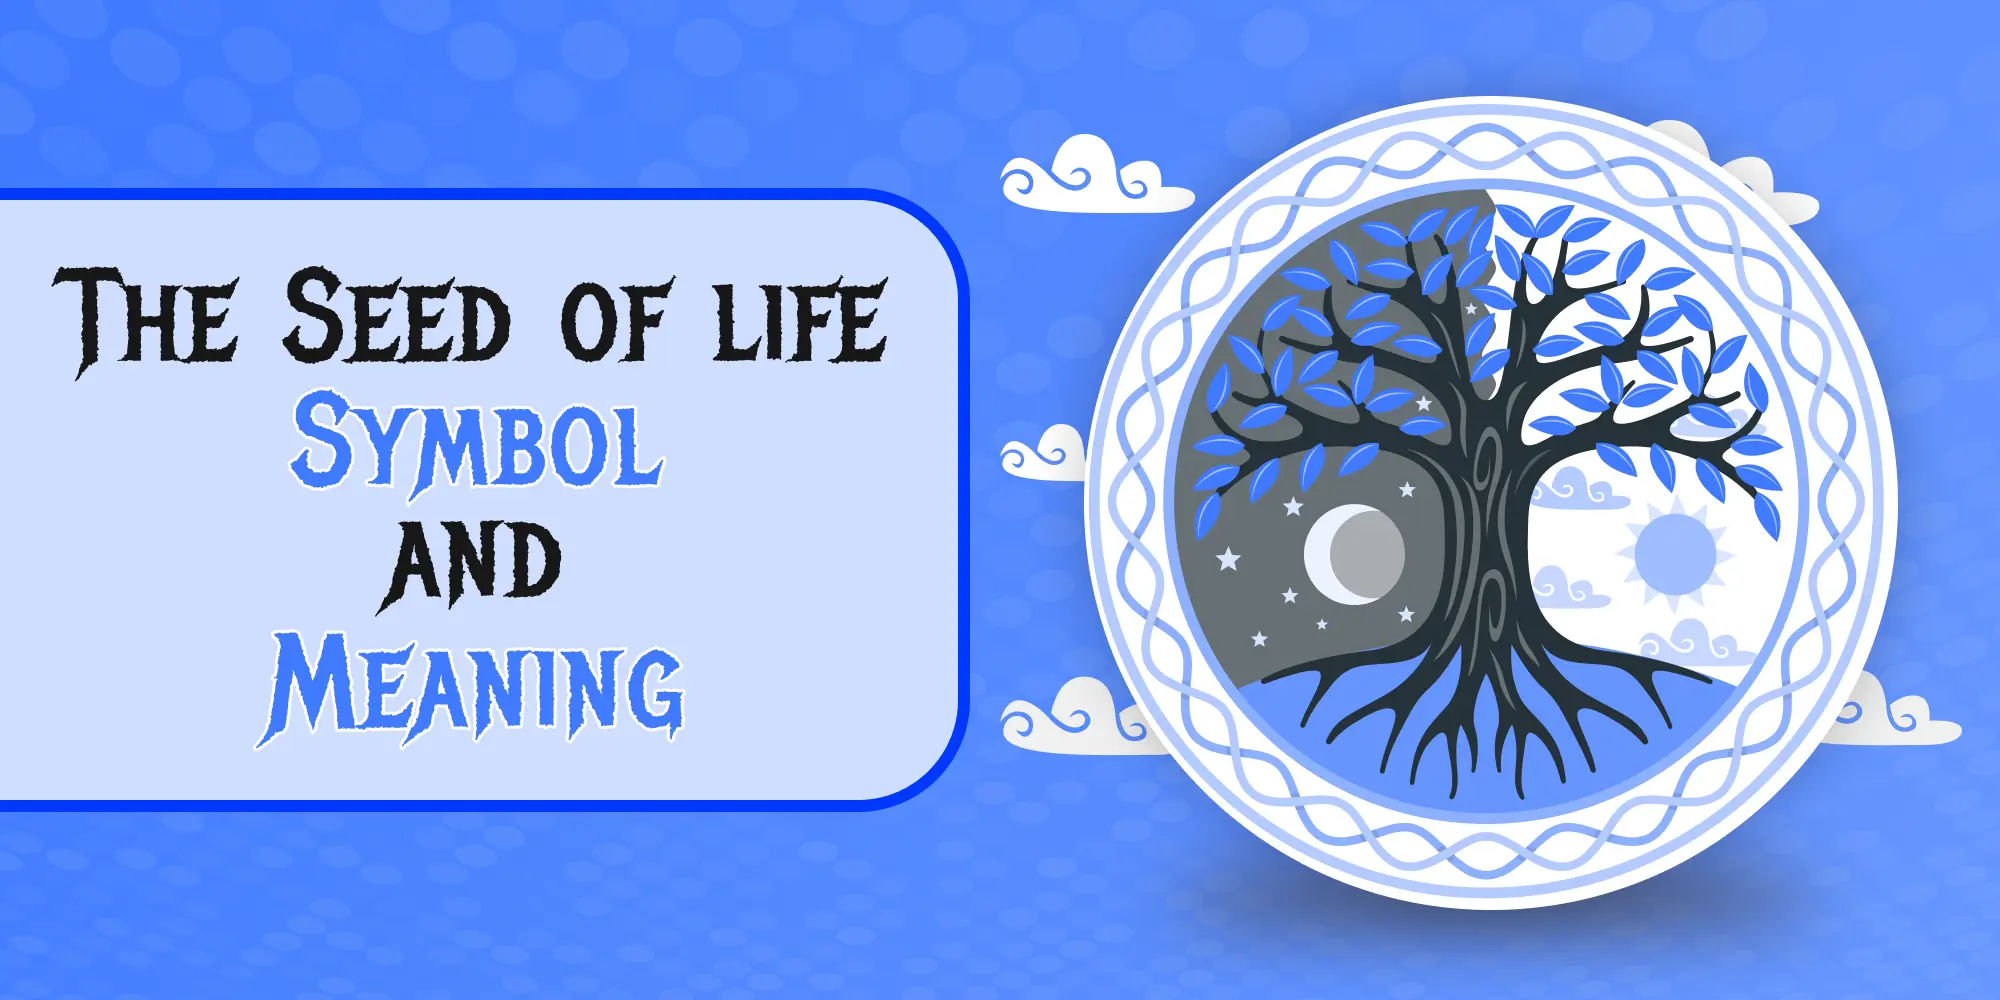 The Seed of life Symbol and Meaning